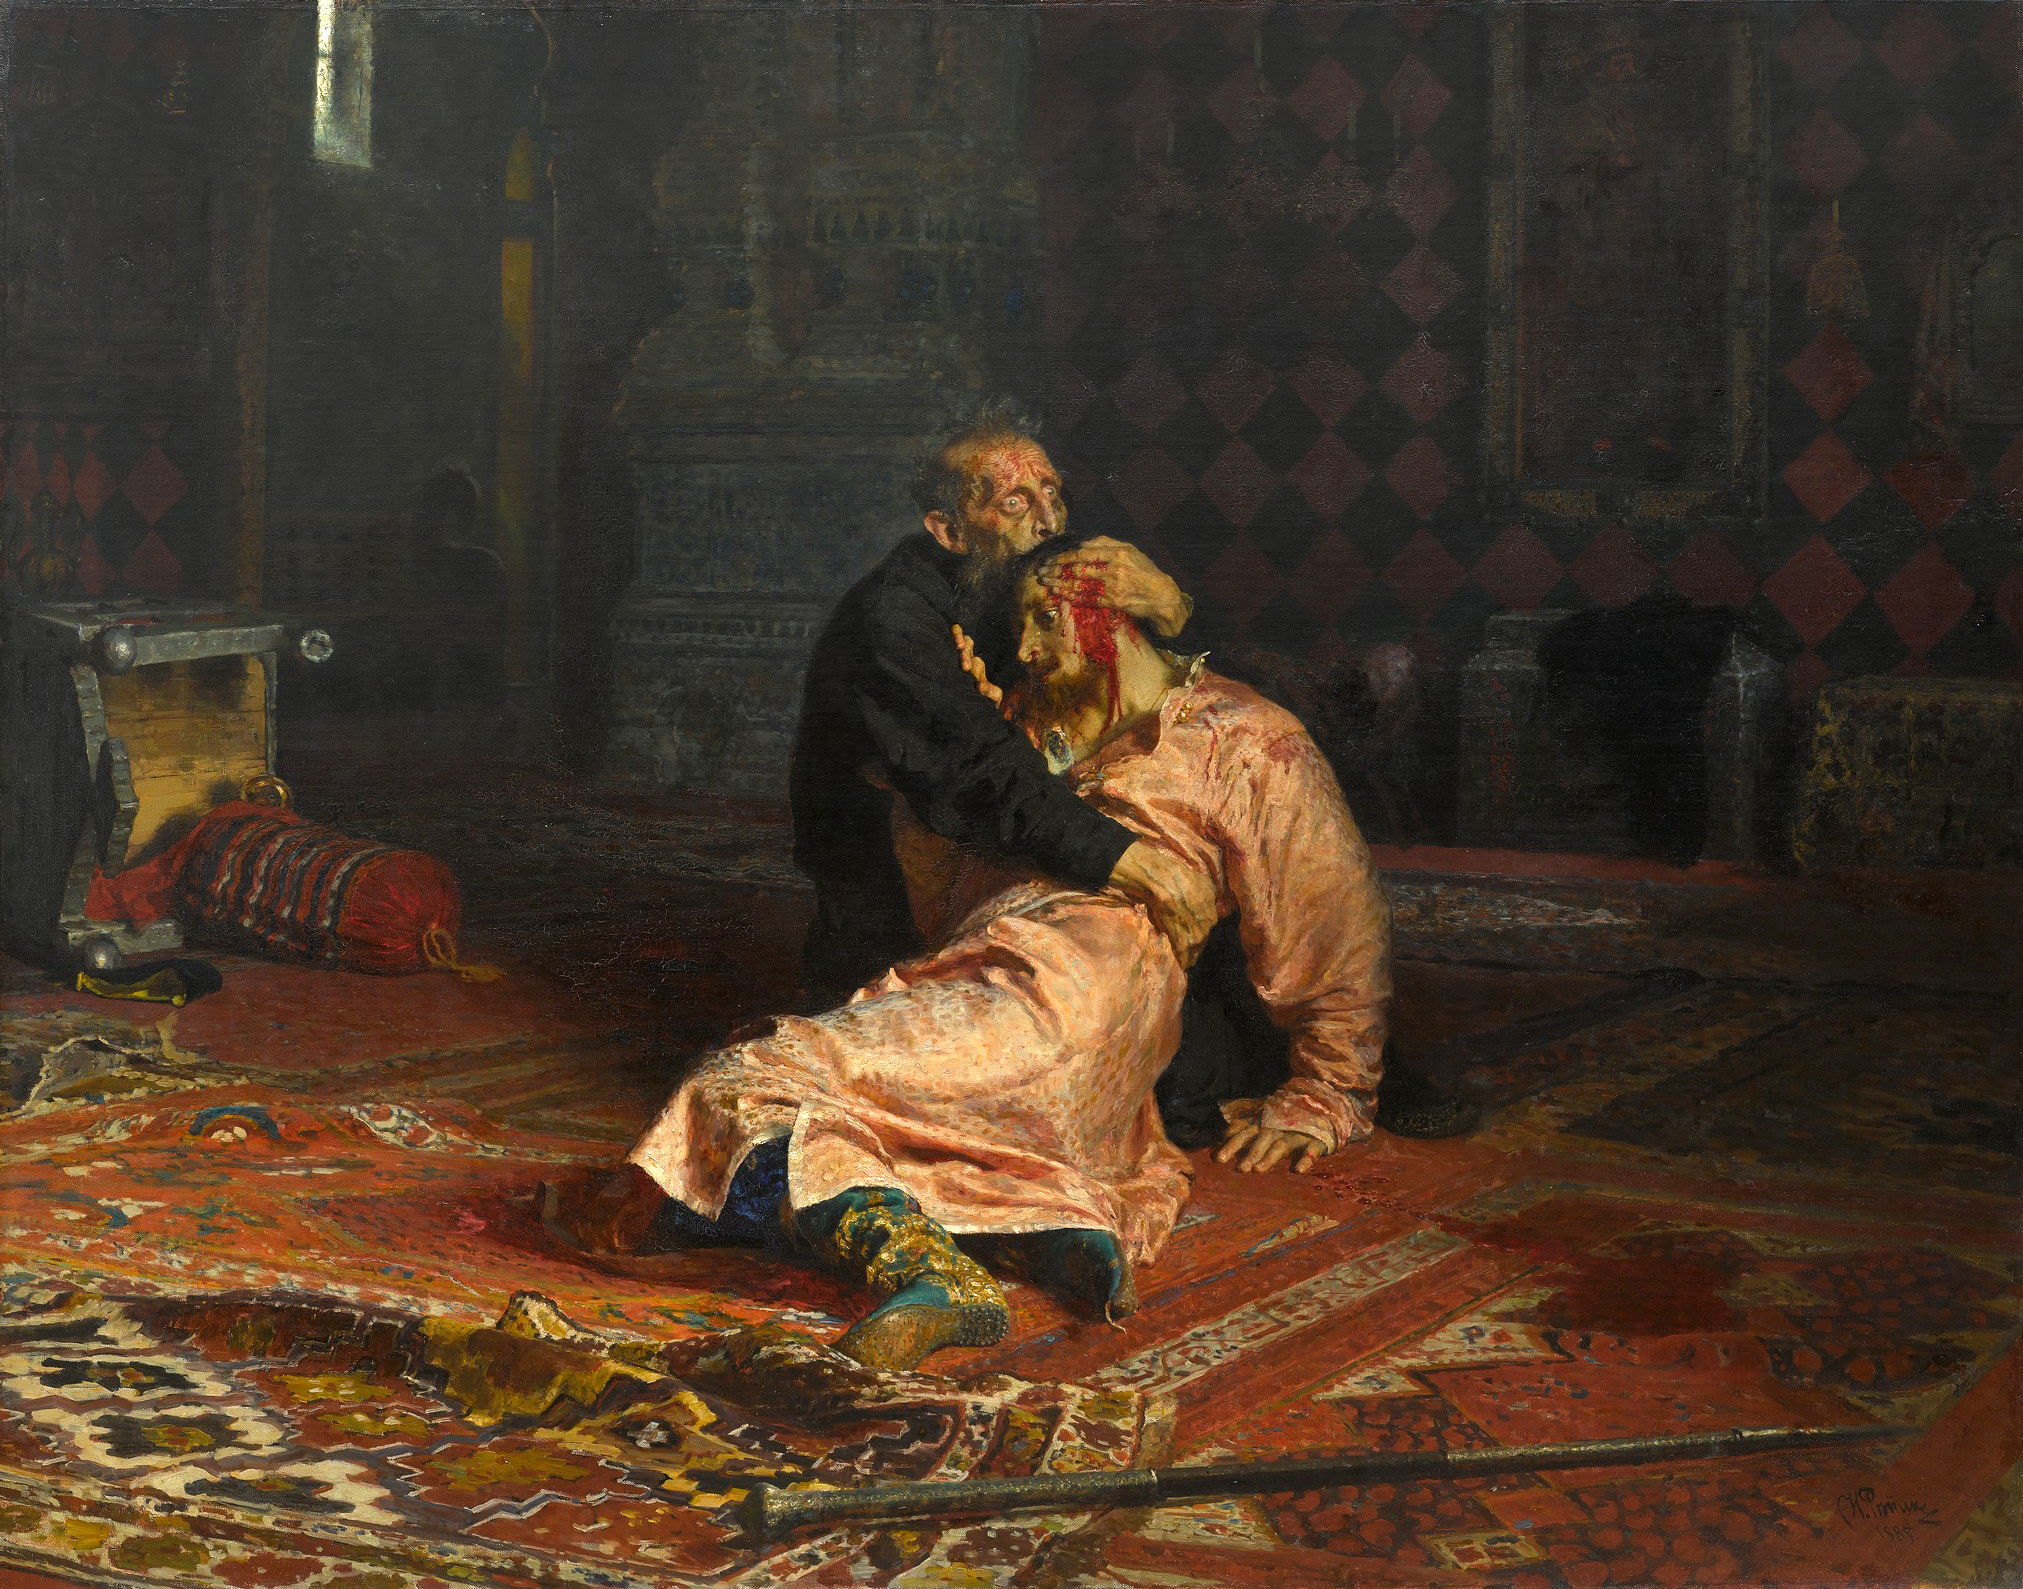  Ivan IV with his dying son, a classic rendition from 1885 by painter Ilya Repin